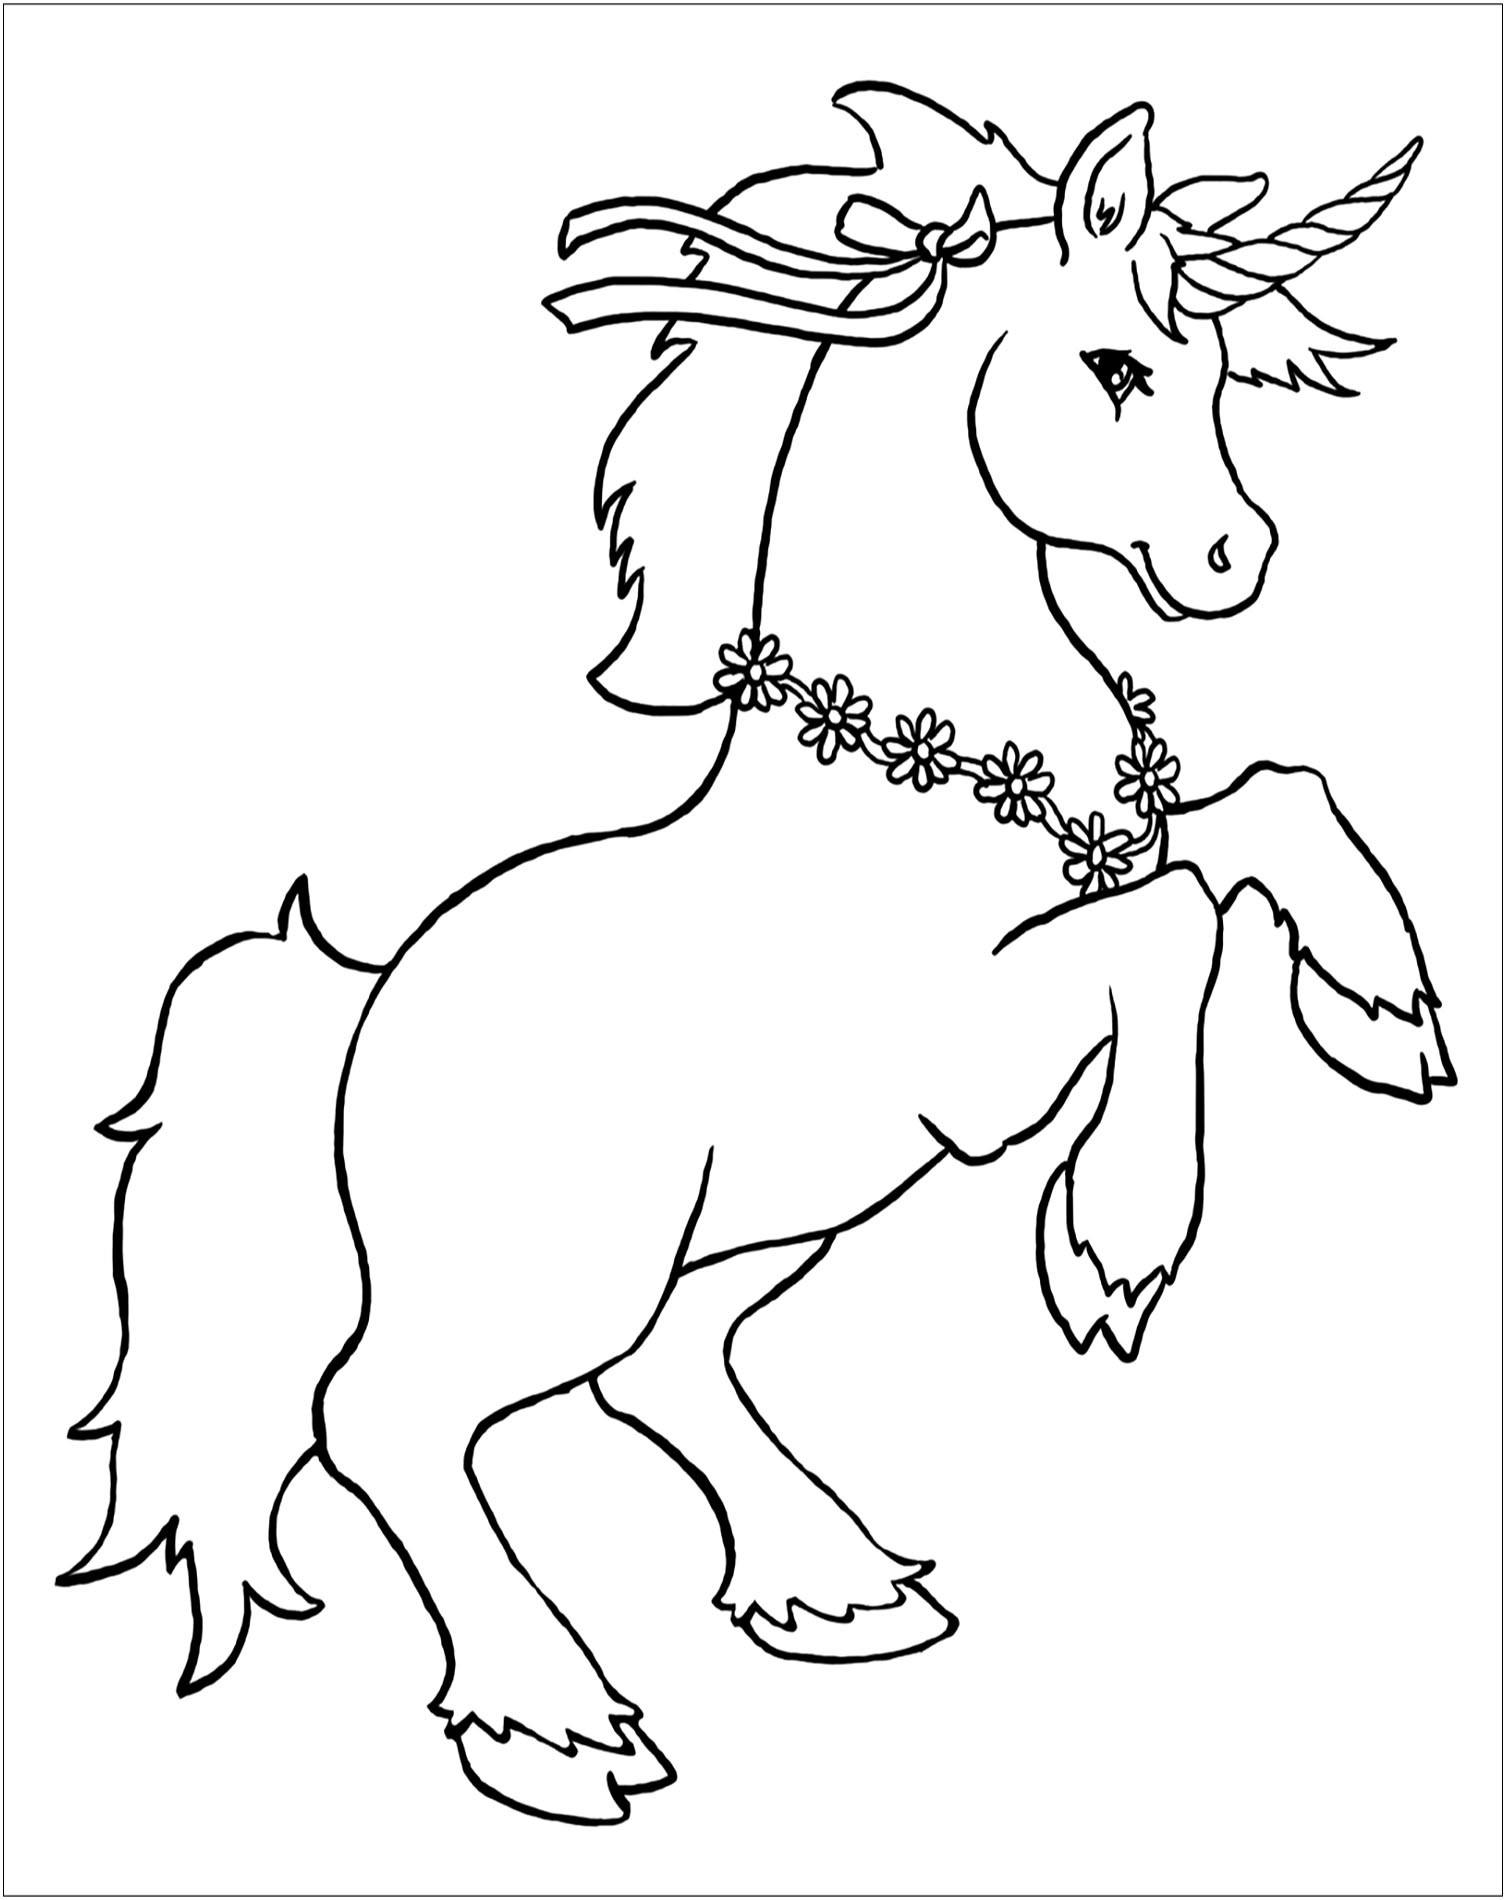 Coloring Pages For Kids Unicorn
 Unicorns to Unicorns Kids Coloring Pages